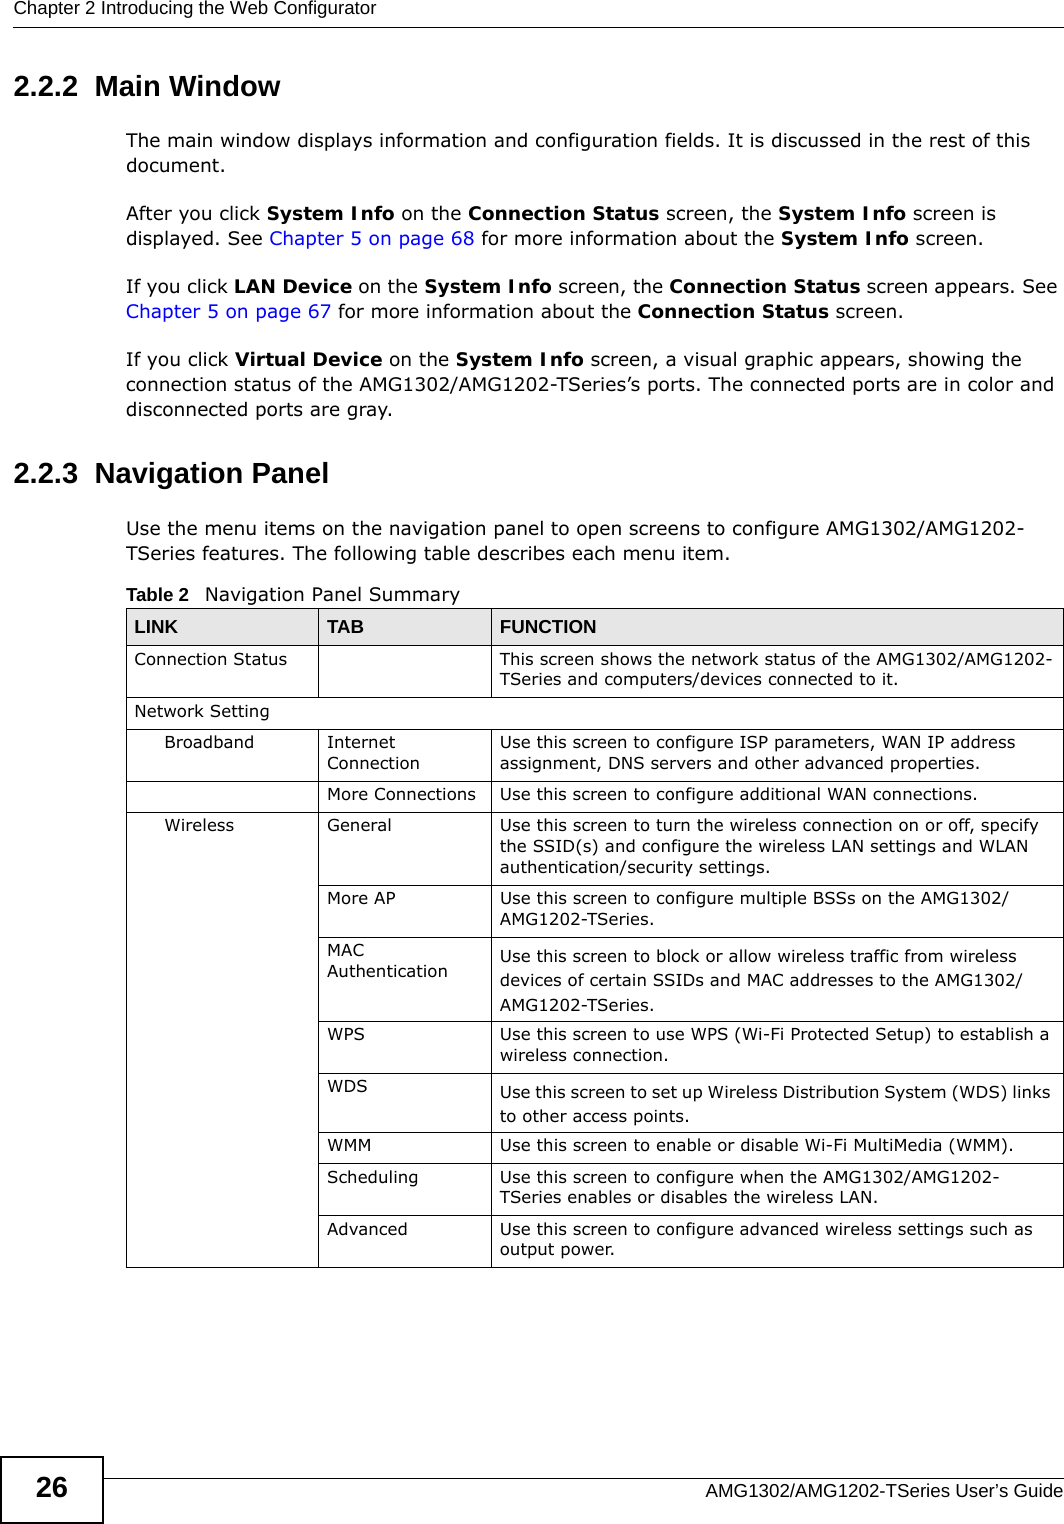 Chapter 2 Introducing the Web ConfiguratorAMG1302/AMG1202-TSeries User’s Guide262.2.2  Main WindowThe main window displays information and configuration fields. It is discussed in the rest of this document.After you click System Info on the Connection Status screen, the System Info screen is displayed. See Chapter 5 on page 68 for more information about the System Info screen.If you click LAN Device on the System Info screen, the Connection Status screen appears. See Chapter 5 on page 67 for more information about the Connection Status screen.If you click Virtual Device on the System Info screen, a visual graphic appears, showing the connection status of the AMG1302/AMG1202-TSeries’s ports. The connected ports are in color and disconnected ports are gray.2.2.3  Navigation PanelUse the menu items on the navigation panel to open screens to configure AMG1302/AMG1202-TSeries features. The following table describes each menu item.Table 2   Navigation Panel SummaryLINK TAB FUNCTIONConnection Status This screen shows the network status of the AMG1302/AMG1202-TSeries and computers/devices connected to it.Network SettingBroadband Internet ConnectionUse this screen to configure ISP parameters, WAN IP address assignment, DNS servers and other advanced properties.More Connections Use this screen to configure additional WAN connections.Wireless General Use this screen to turn the wireless connection on or off, specify the SSID(s) and configure the wireless LAN settings and WLAN authentication/security settings.More AP Use this screen to configure multiple BSSs on the AMG1302/AMG1202-TSeries.MAC Authentication Use this screen to block or allow wireless traffic from wireless devices of certain SSIDs and MAC addresses to the AMG1302/AMG1202-TSeries.WPS Use this screen to use WPS (Wi-Fi Protected Setup) to establish a wireless connection.WDS Use this screen to set up Wireless Distribution System (WDS) links to other access points.WMM Use this screen to enable or disable Wi-Fi MultiMedia (WMM).Scheduling Use this screen to configure when the AMG1302/AMG1202-TSeries enables or disables the wireless LAN.Advanced Use this screen to configure advanced wireless settings such as output power.